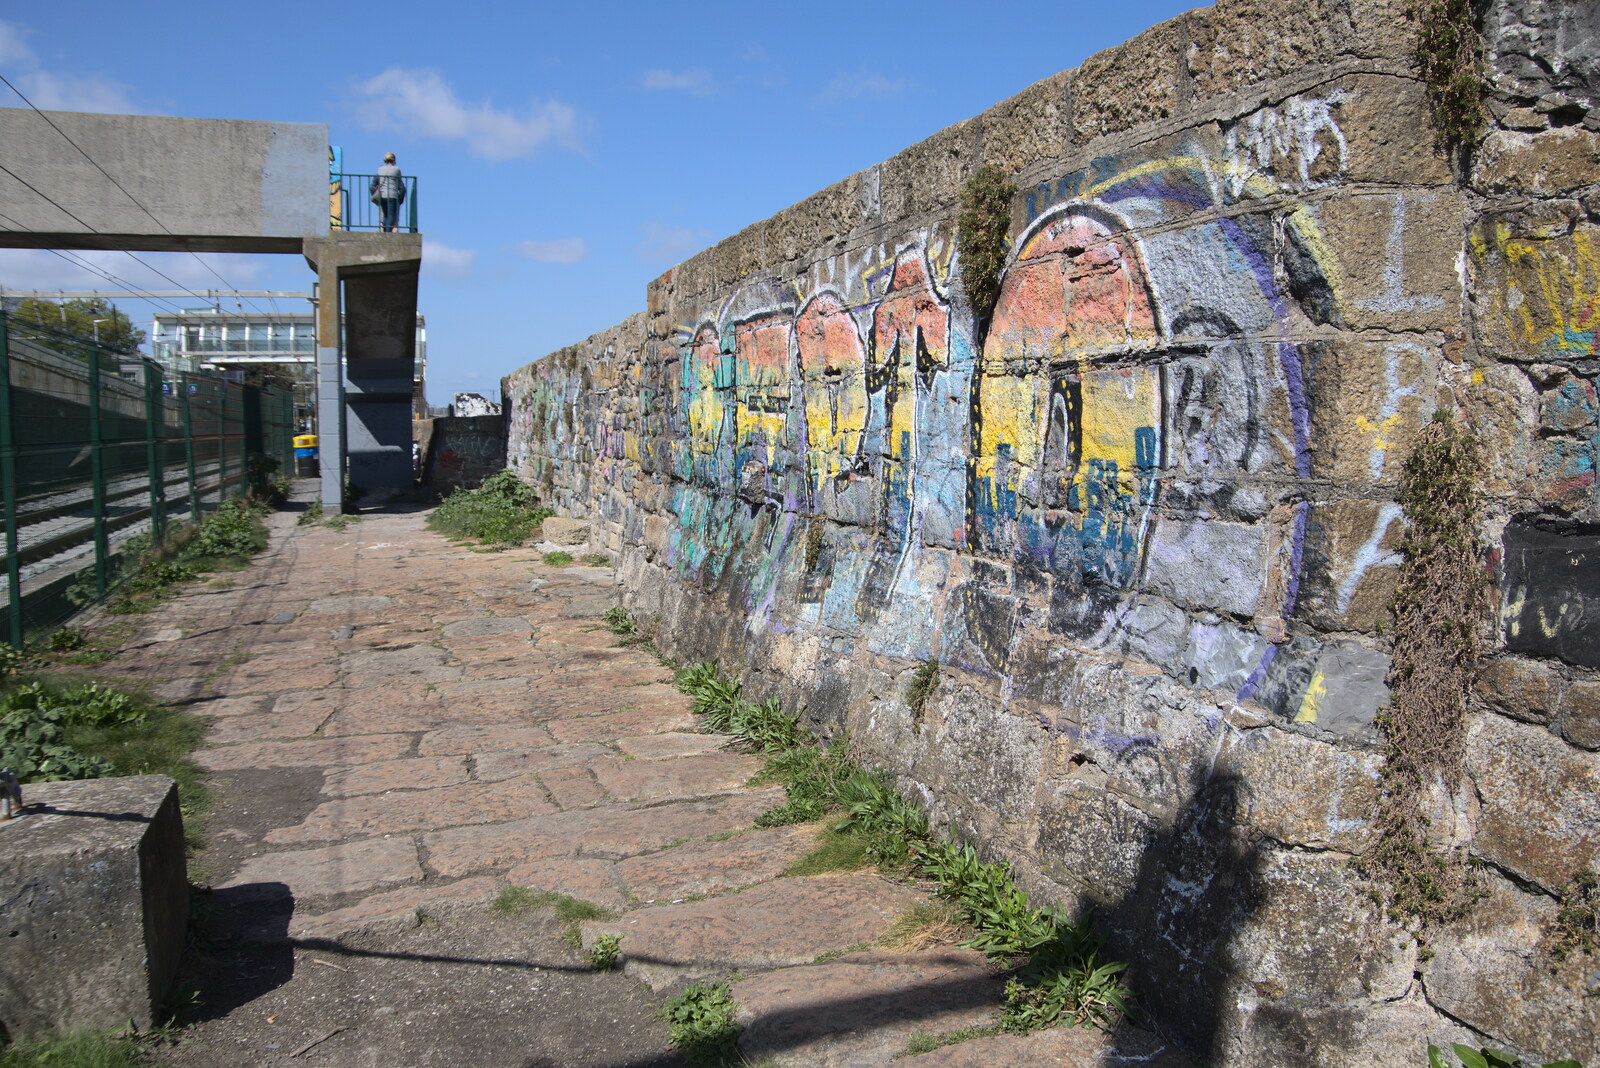 Blackrock North and South, Louth and County Dublin, Ireland - 23rd April 2022: Tags on the sea wall